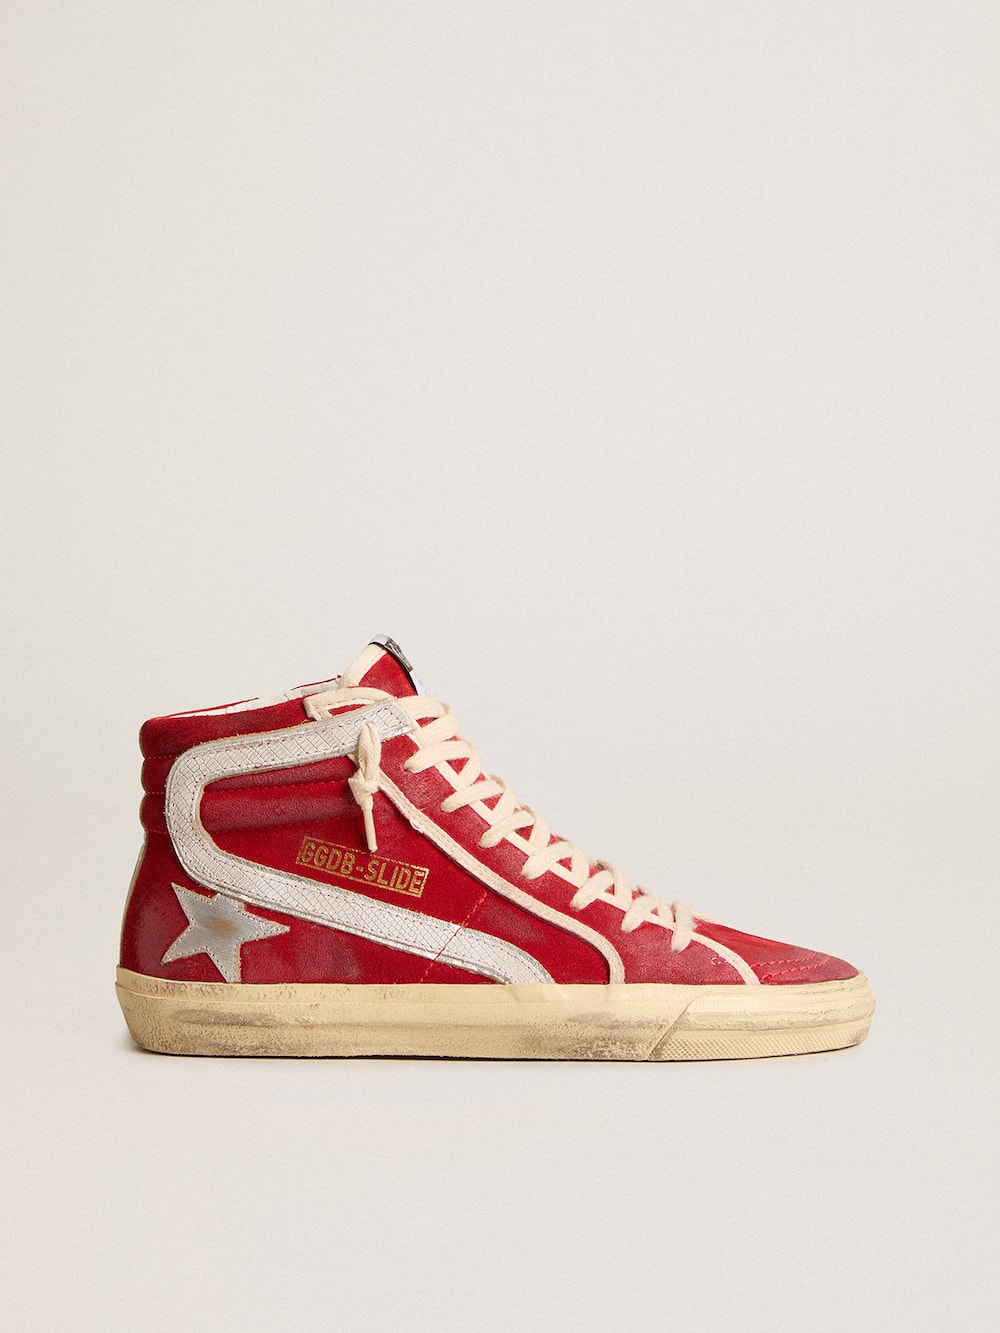 Golden Goose - Slide in red suede with silver star and lizard print flash in 